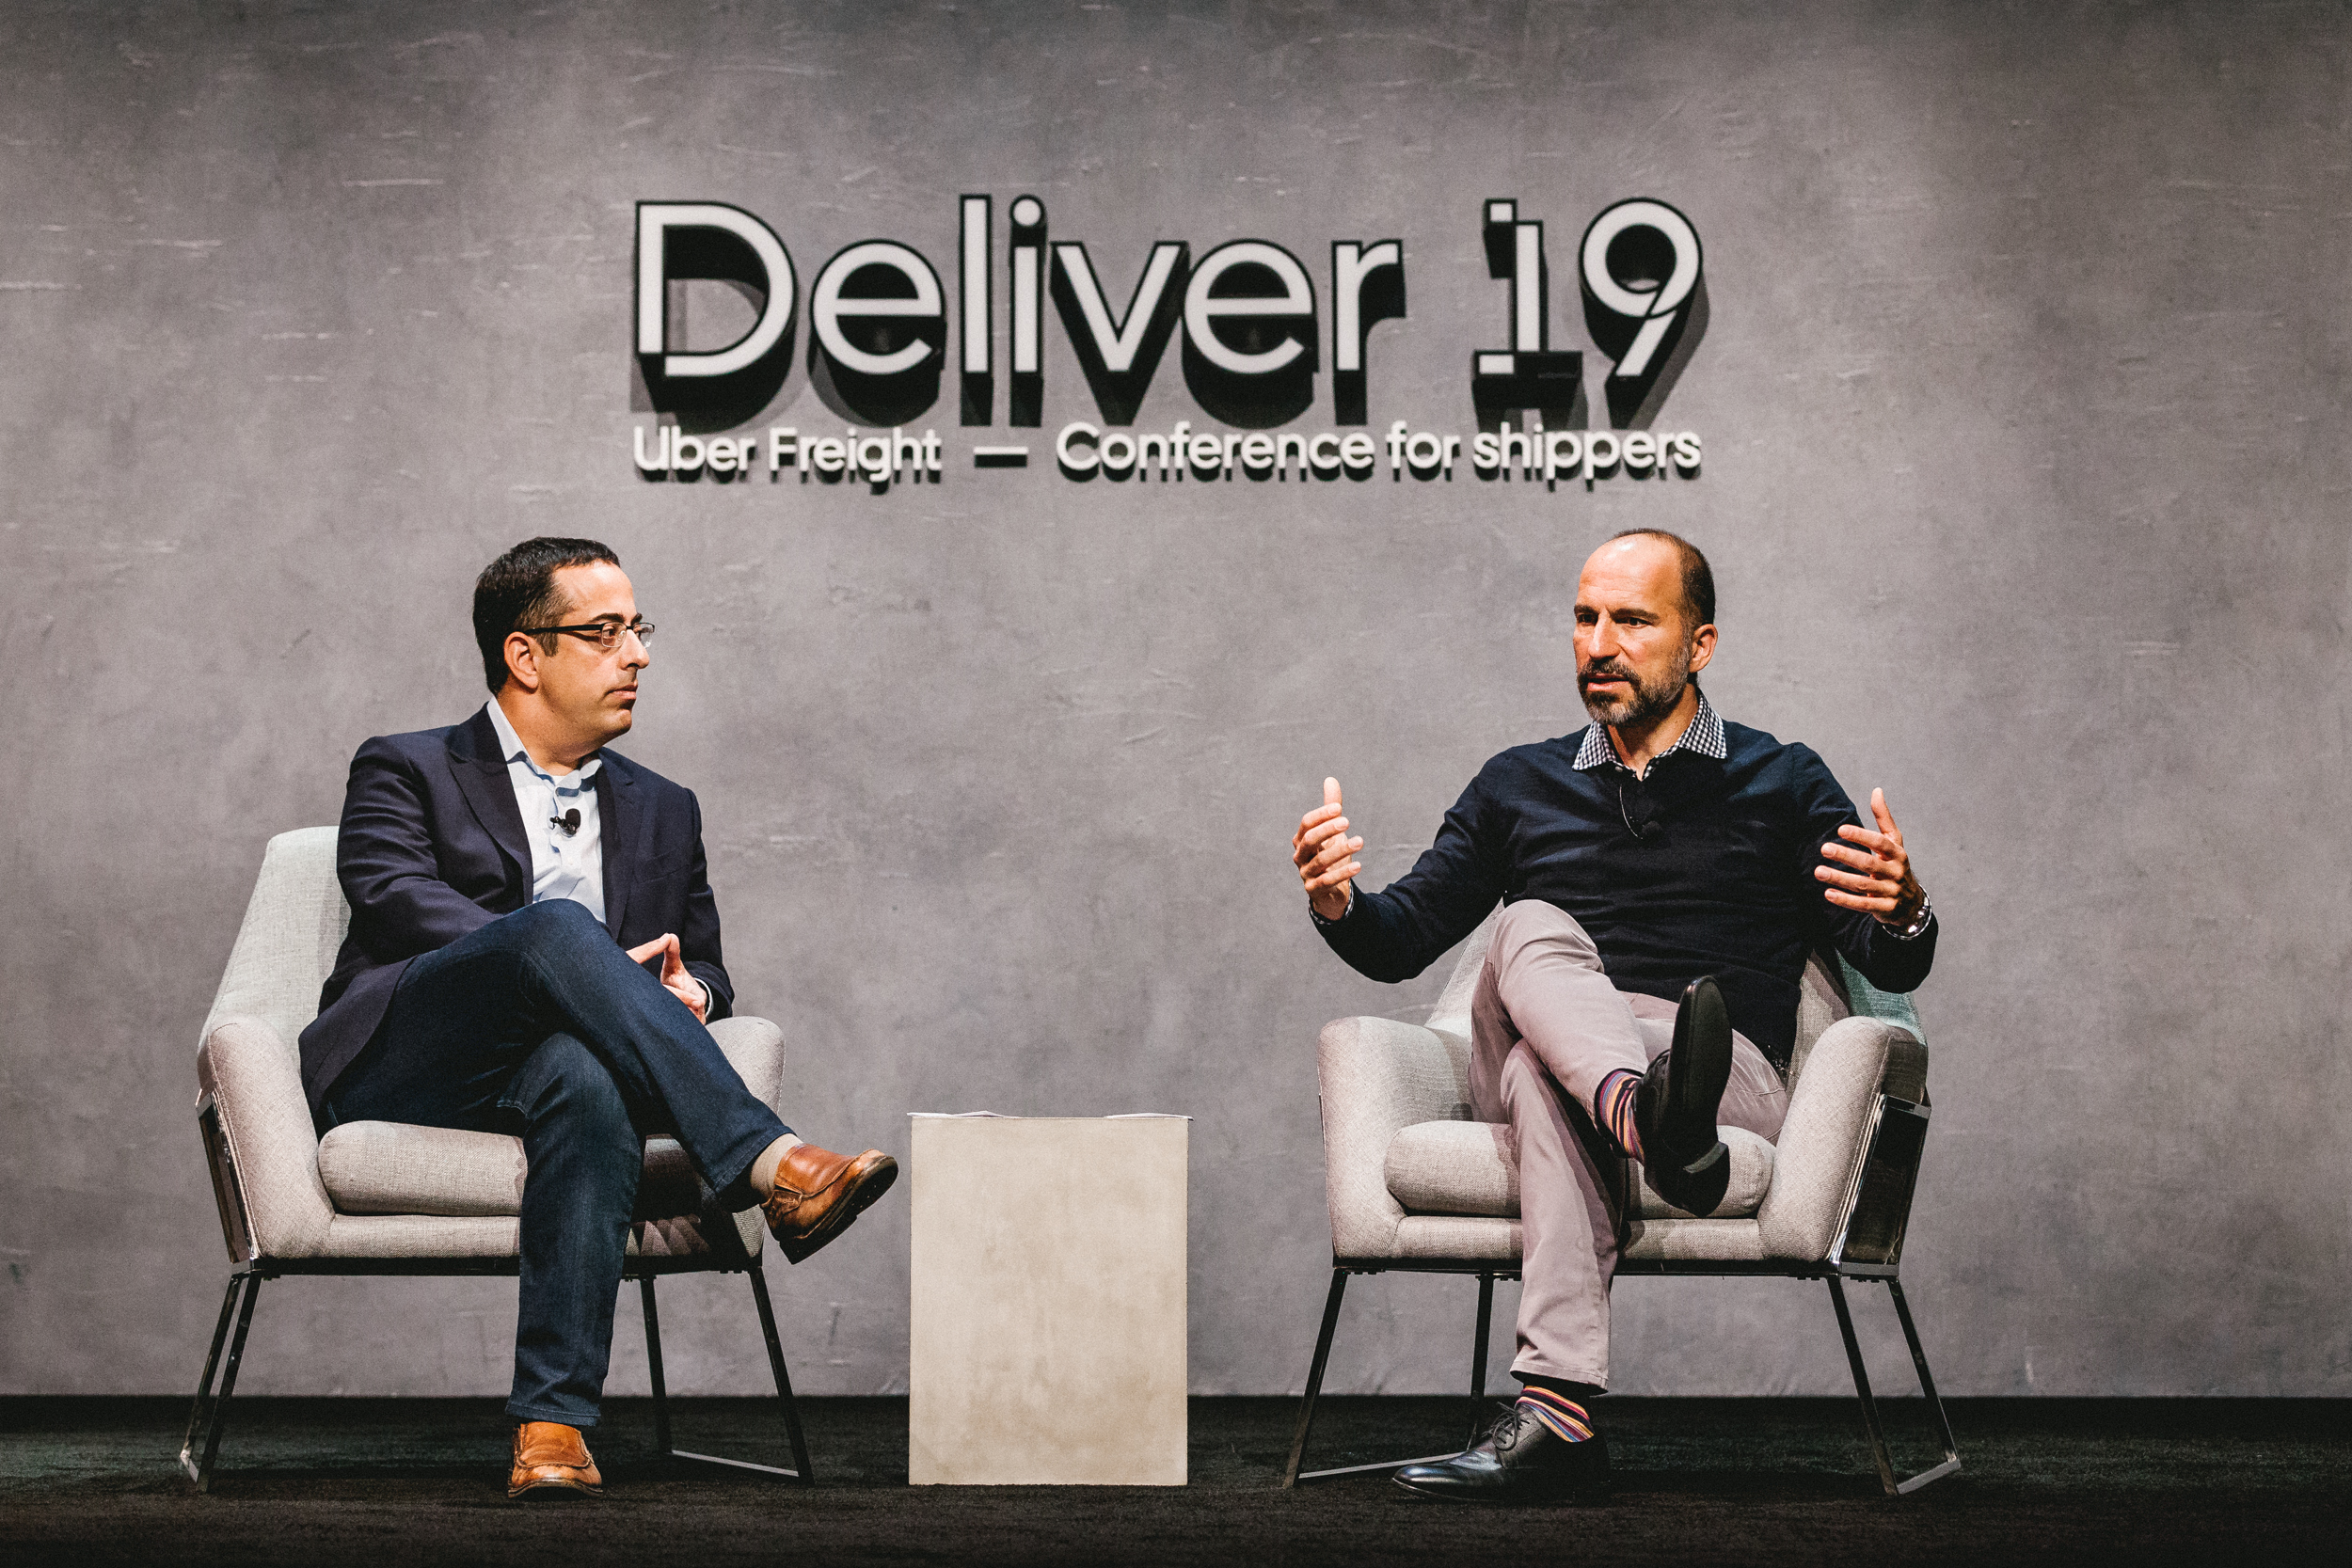 Uber Freight Deliver brings together shippers and industry leaders